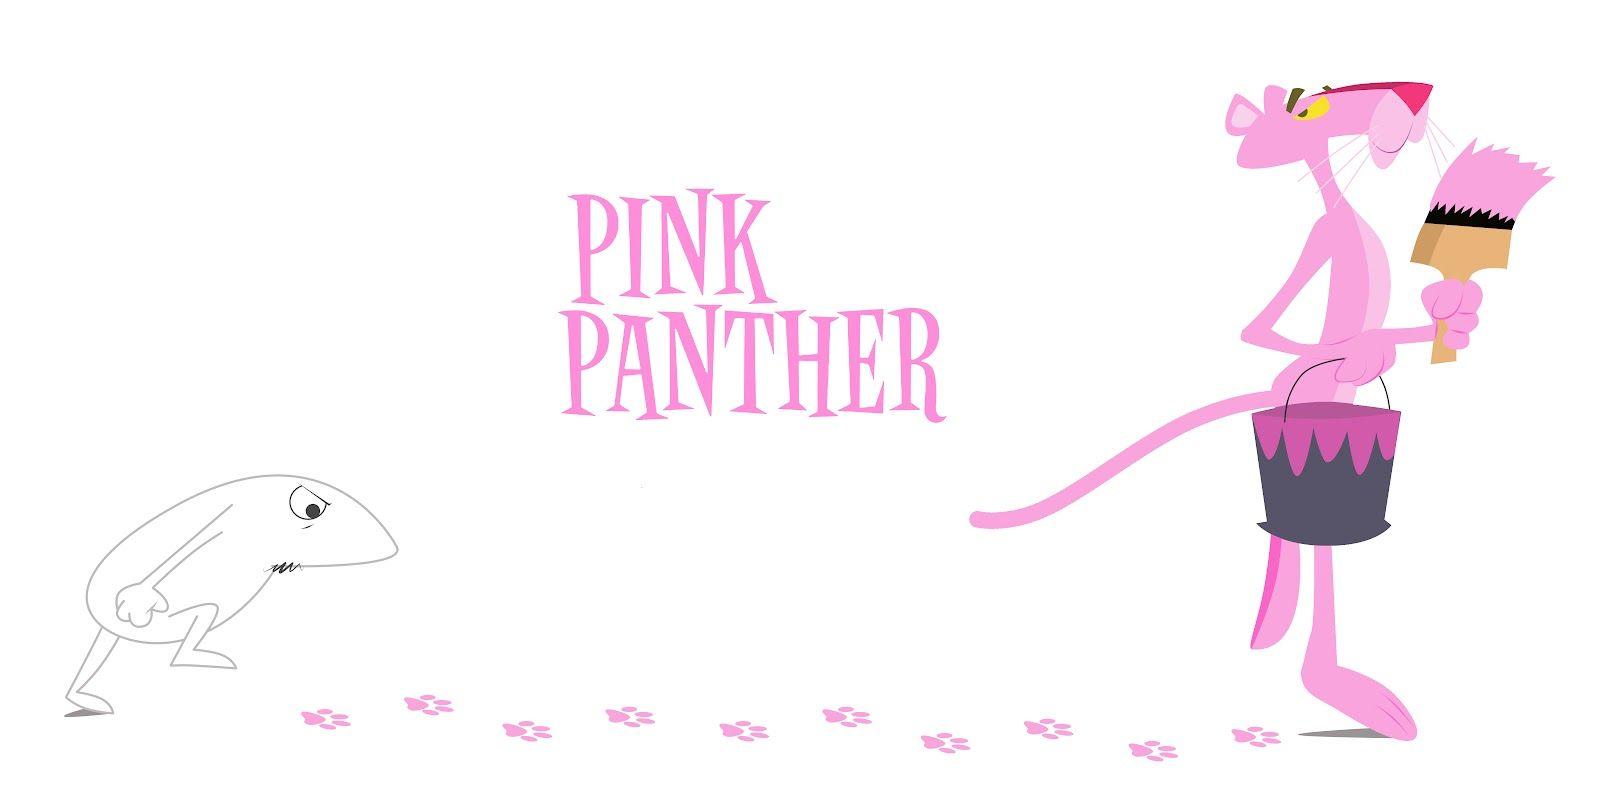 The Pink Panther painting the white panther wallpaper - Pink Panther